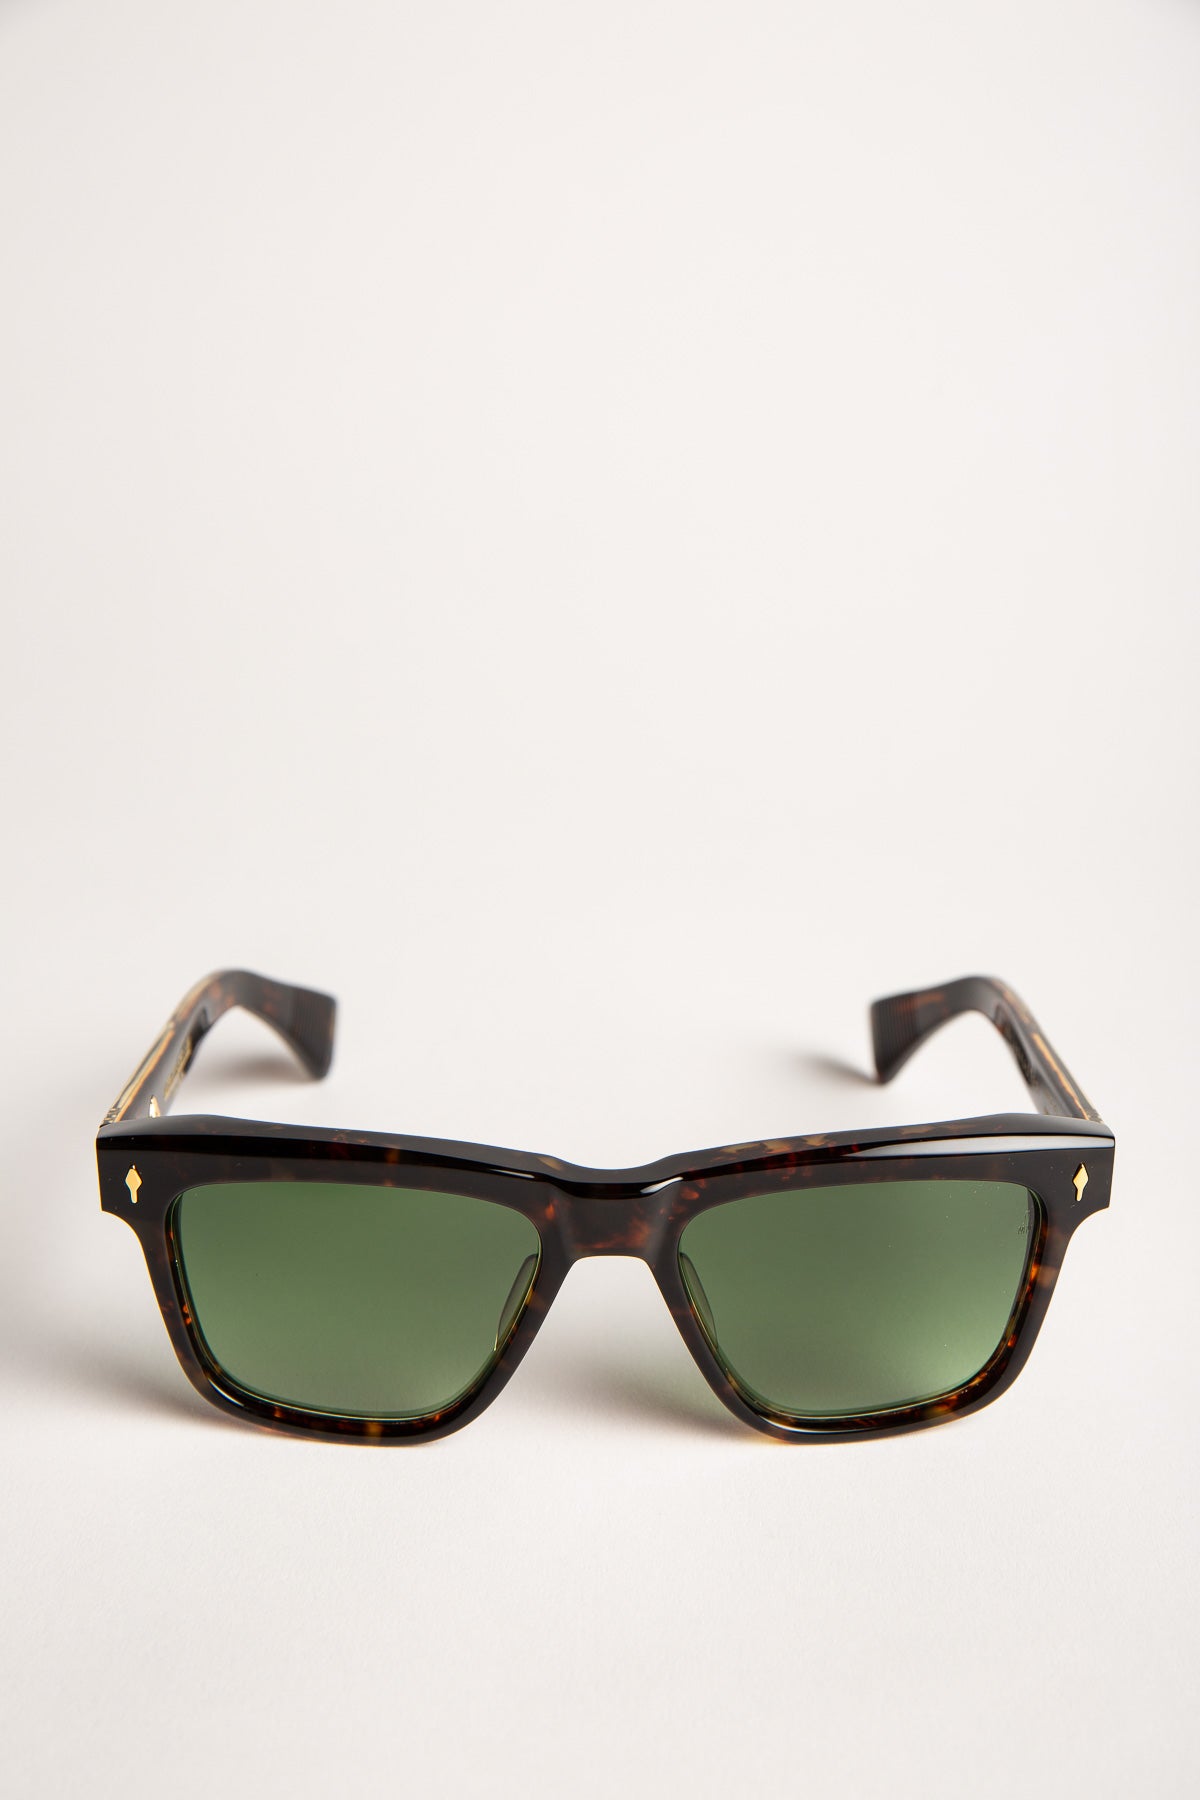 JACQUES MARIE MAGE | LANKASTER SUNGLASSES